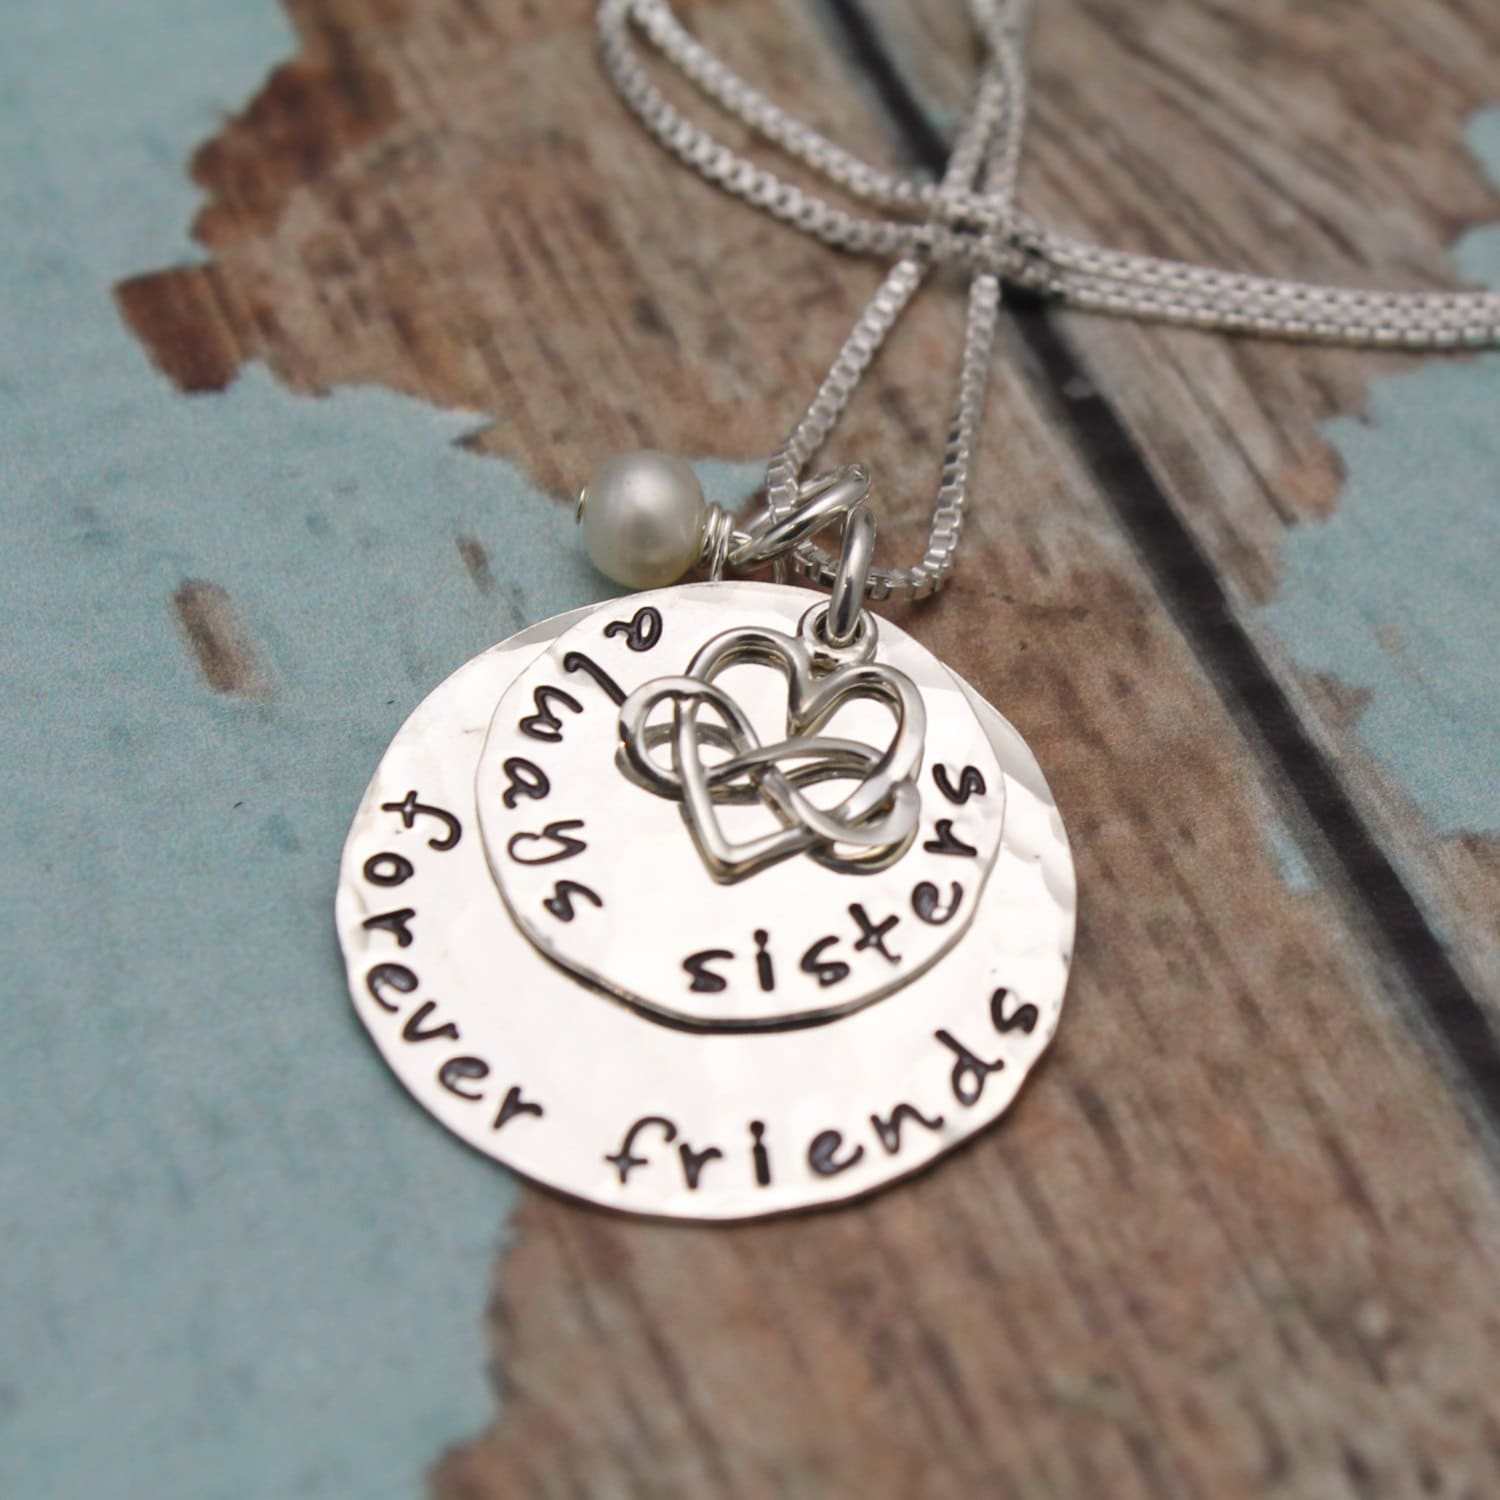 Sisters Necklace, Sister Necklace, Always Sisters, Forever Friends, Sisters Gift, Hand Stamped Sister's Jewelry, Sisters Jewelry